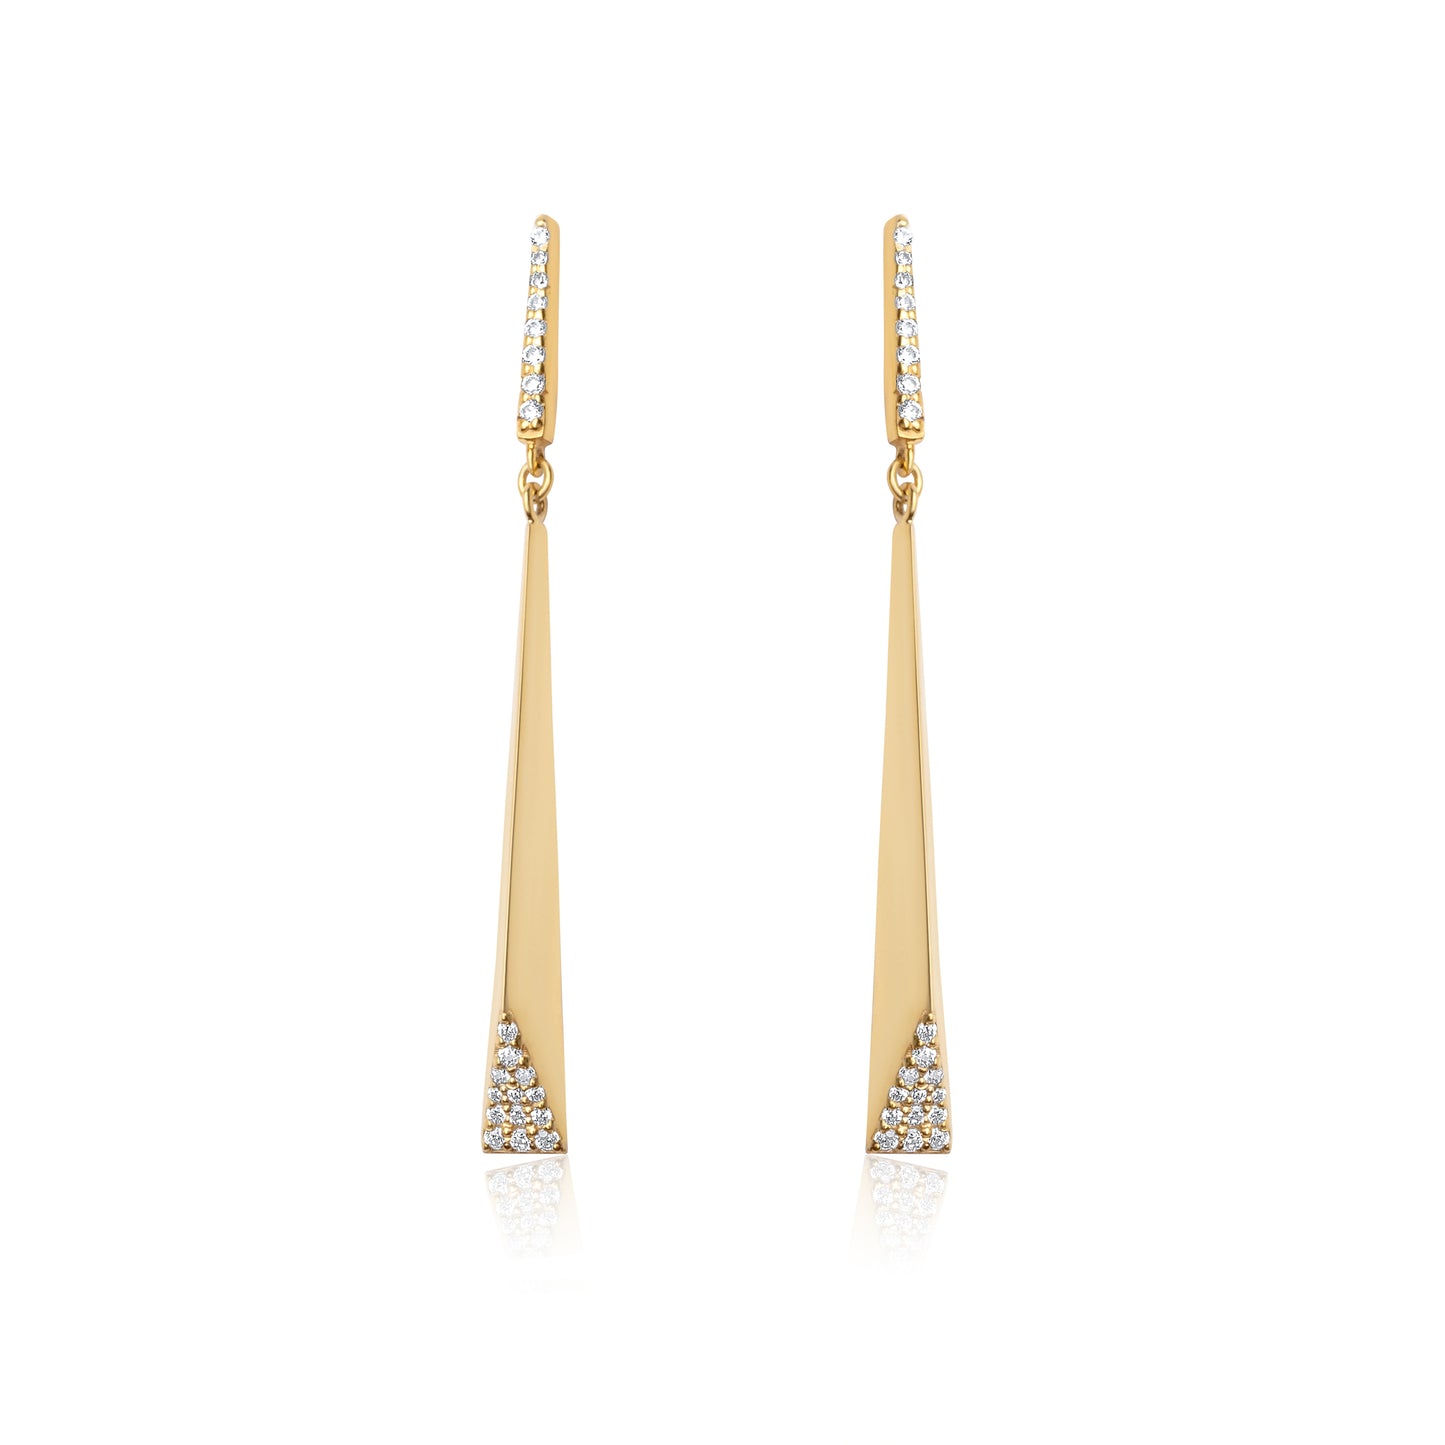 Pyramid pair earrings - Gold plated